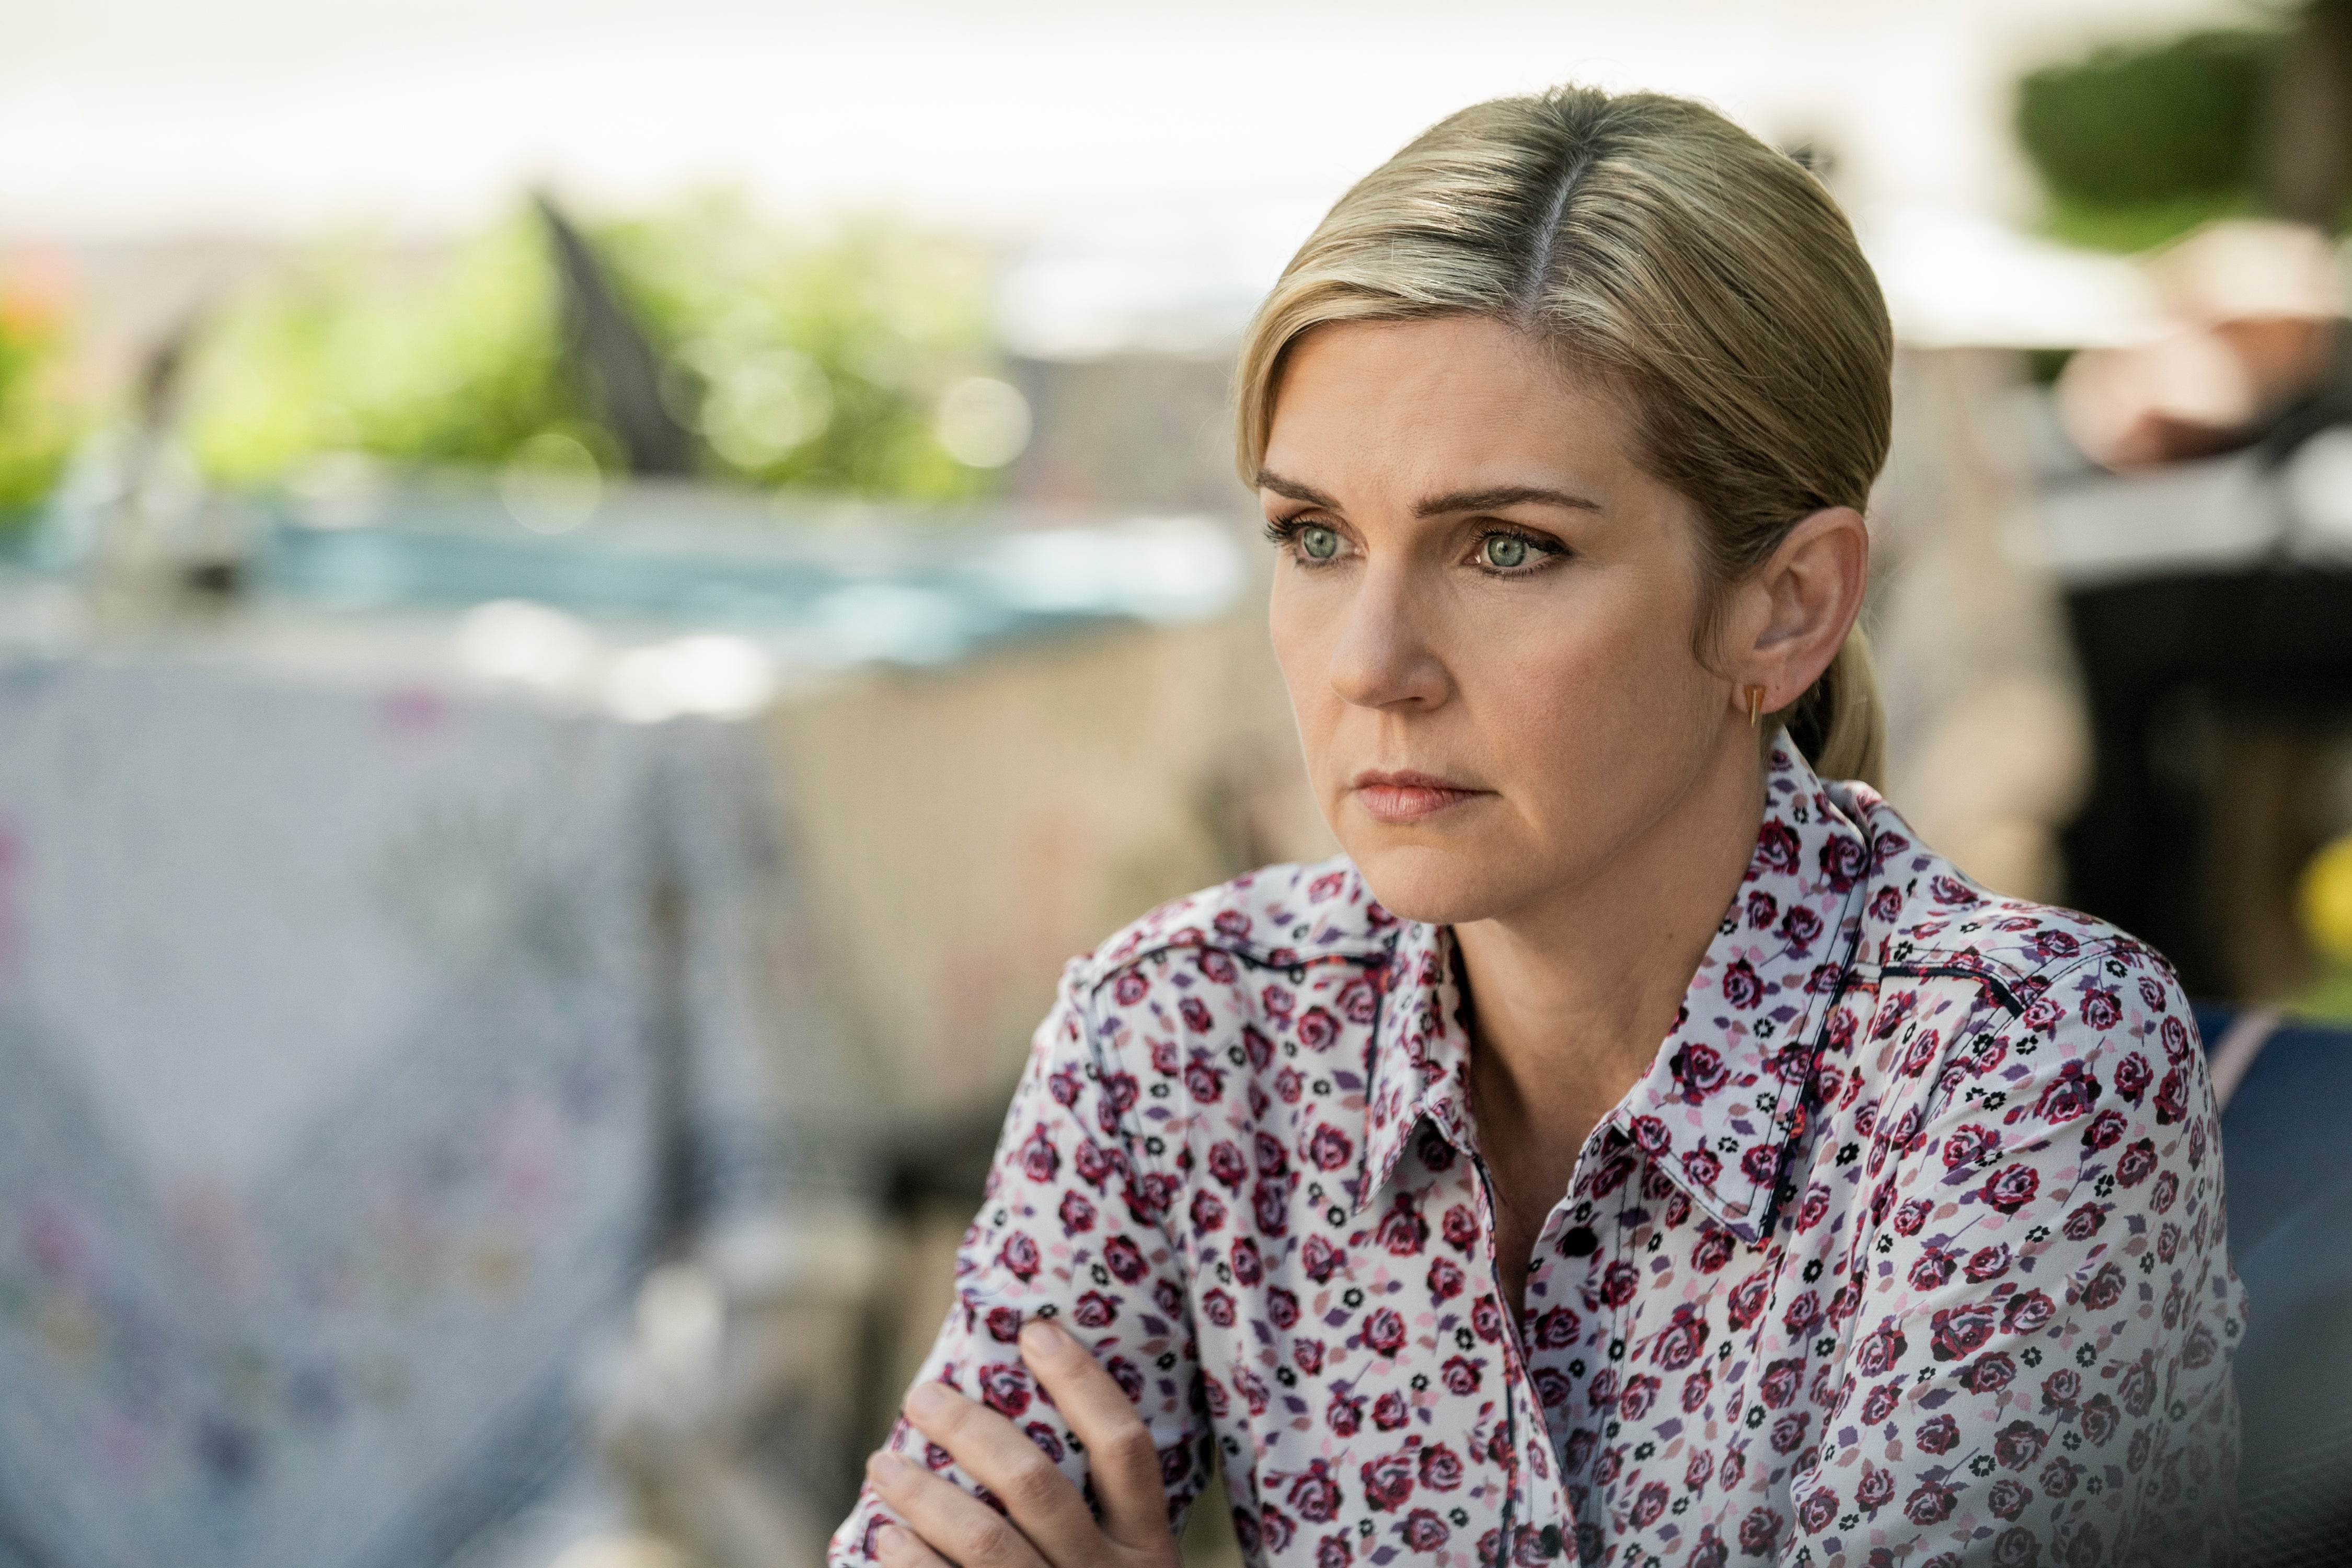 A blond woman in a print shirt stares off into the distance.